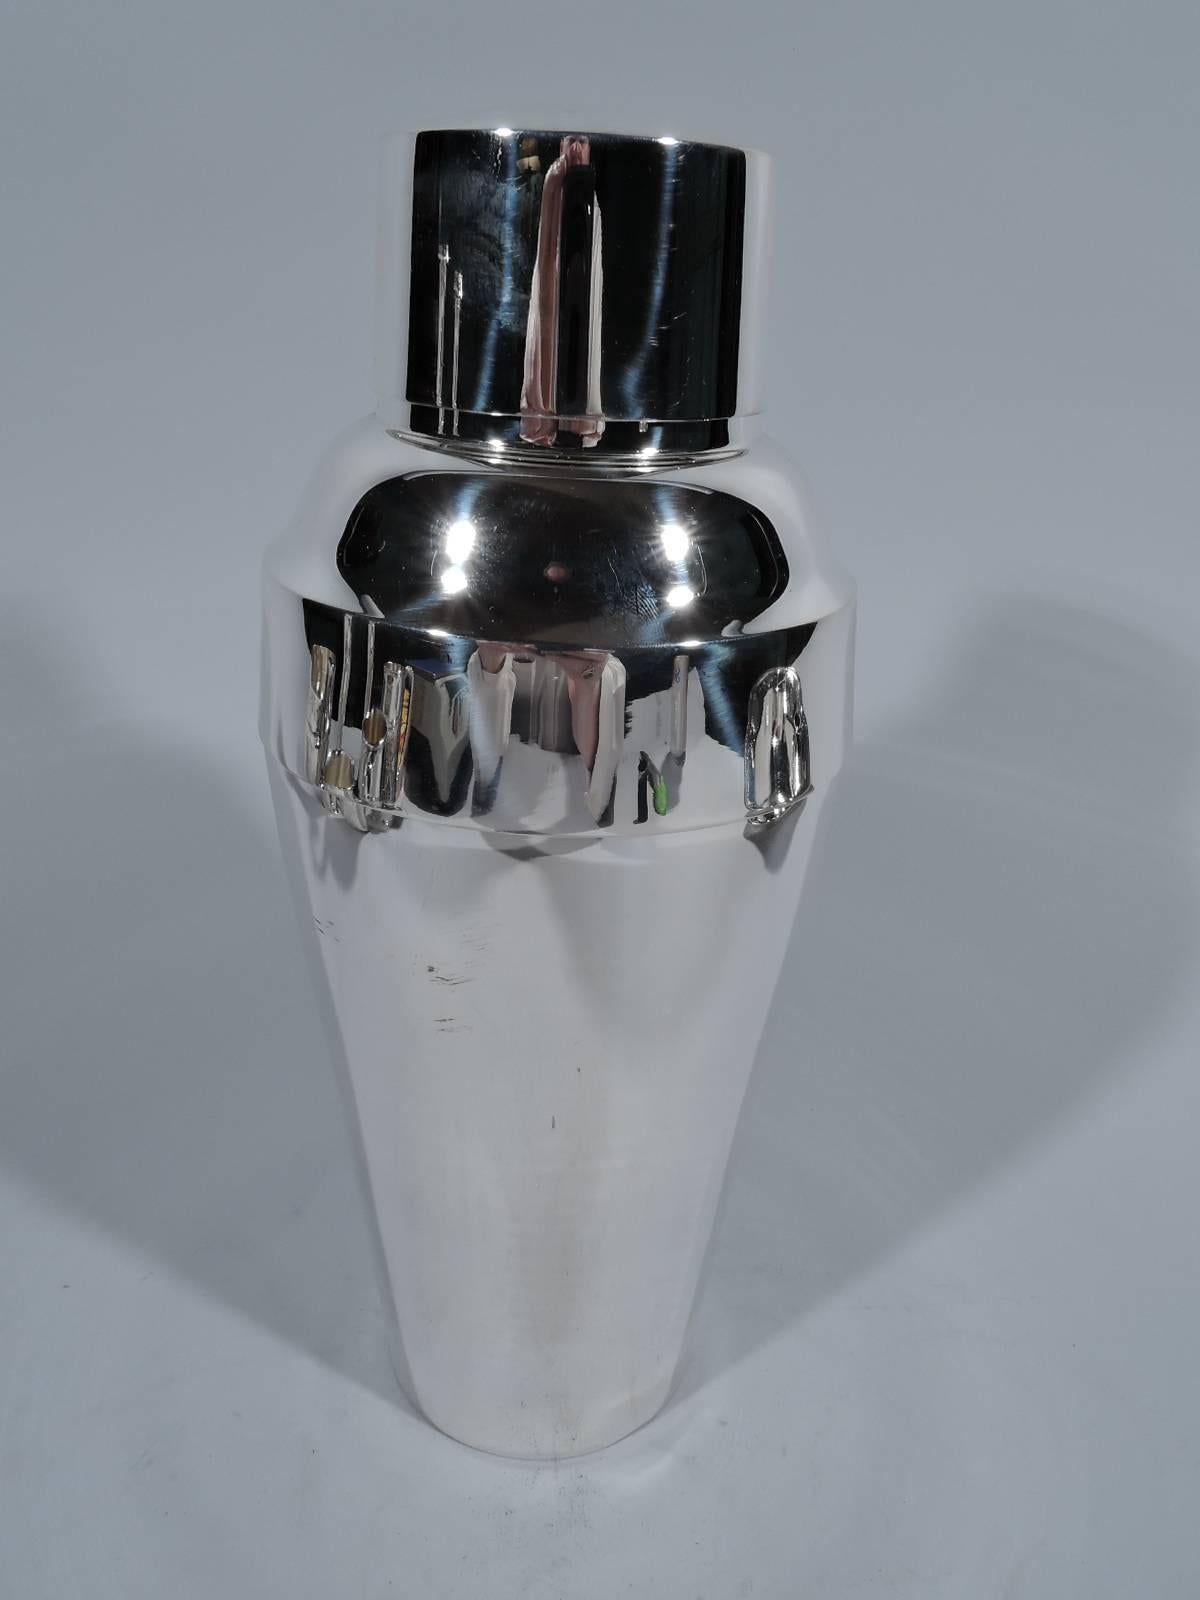 Modern sterling silver cocktail shaker. Made by Georg Jensen Inc. USA, circa 1960. Straight and tapering sides. Cover has curved shoulders and straight neck with built-in strainer and snug-fitting cover. Terrific Midcentury barware. Hallmark